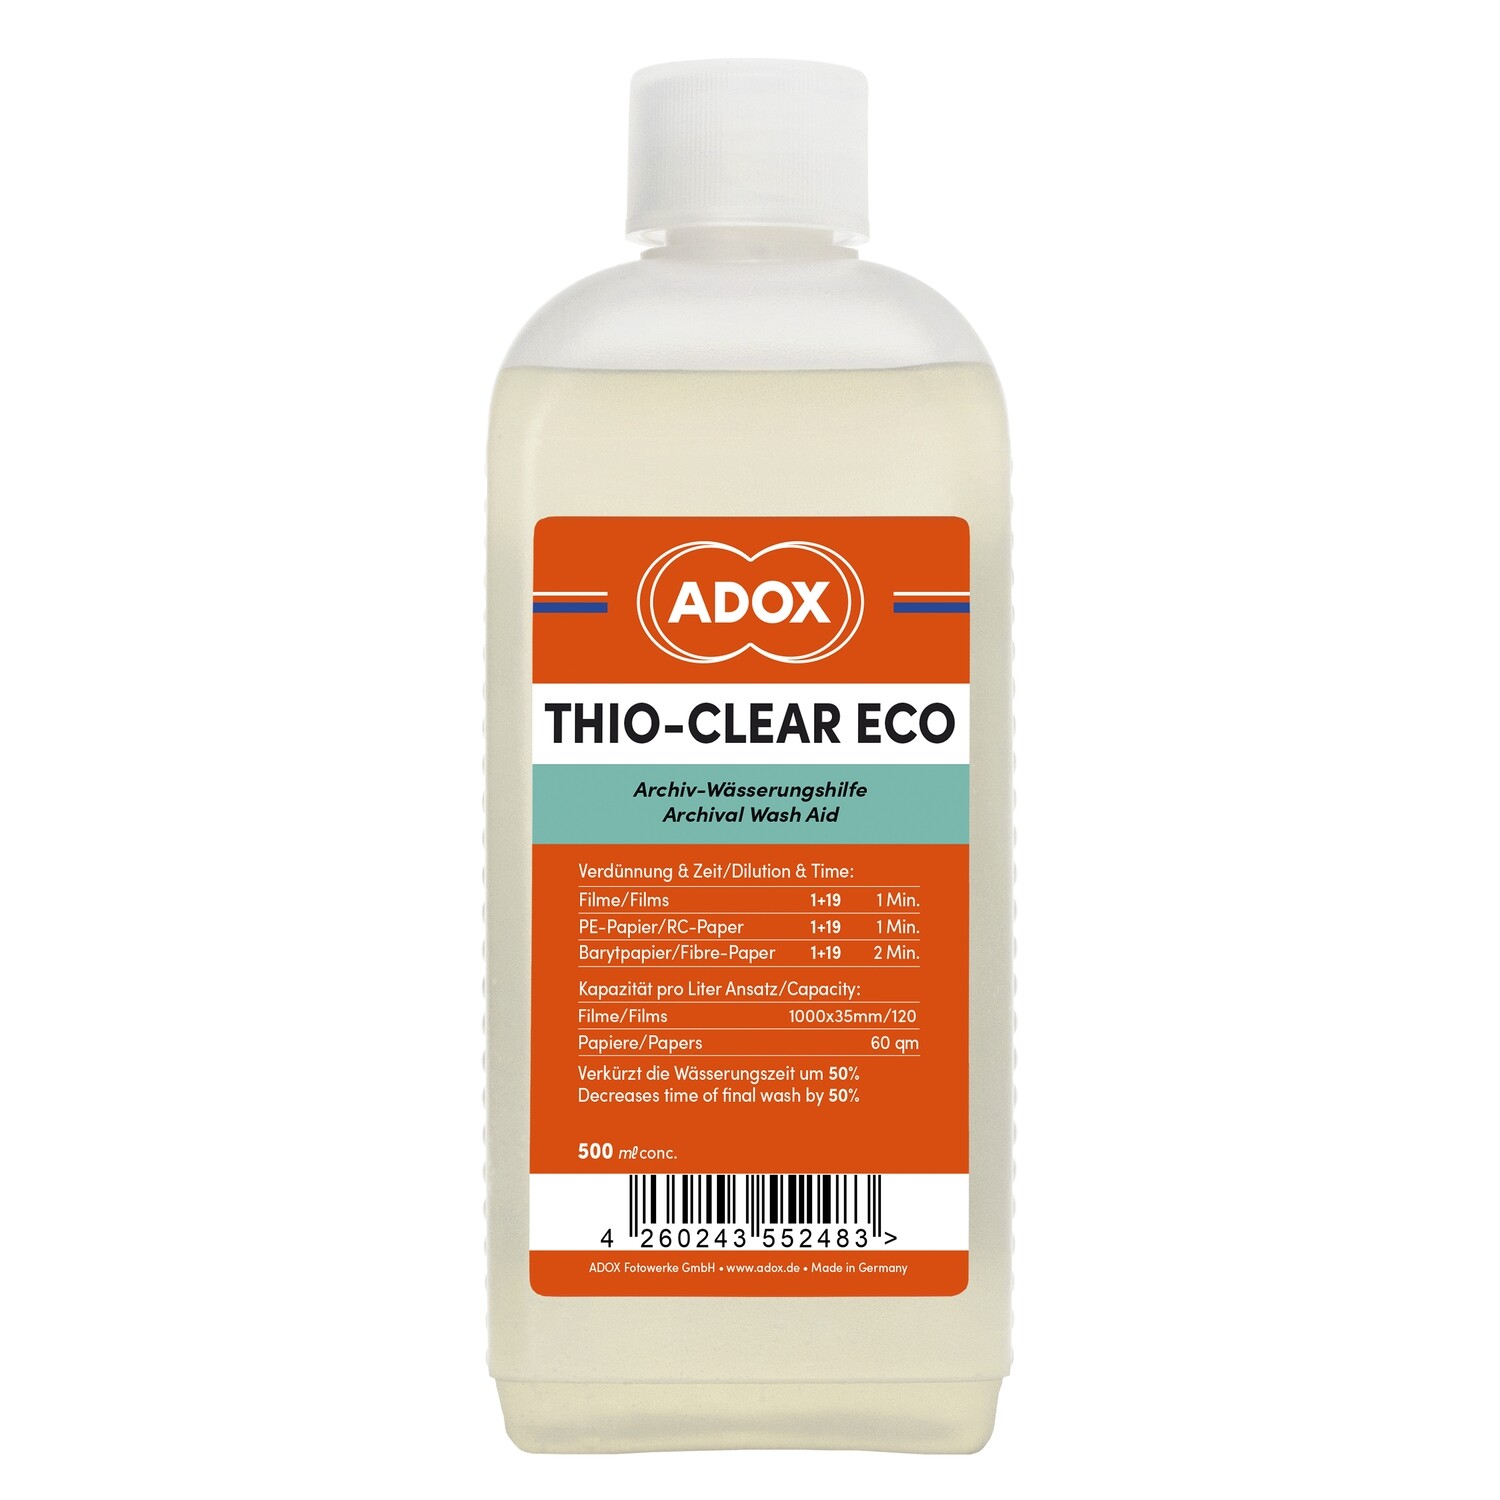 Adox Thio-Clear Eco Waxhaid for Film and Paper - 500ml